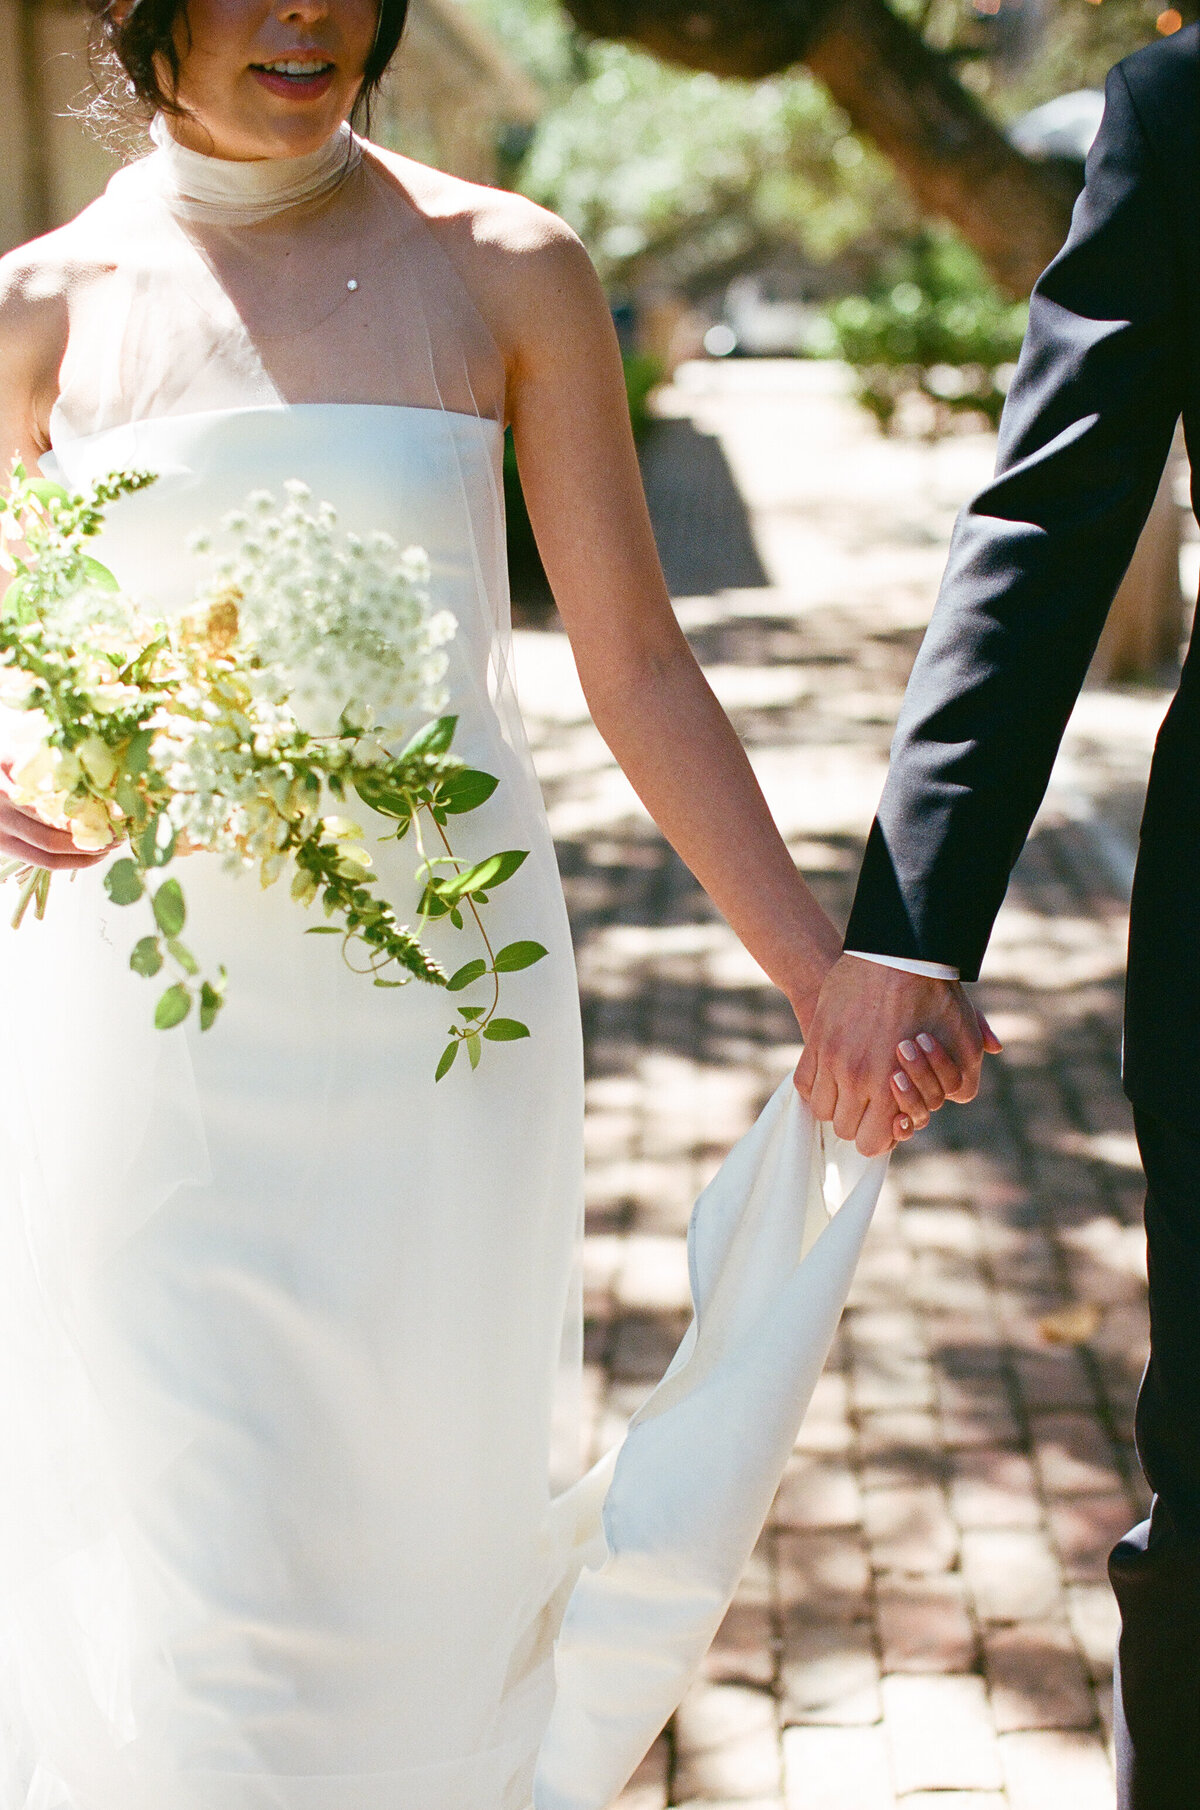 Bride and groom holding hands in the grounds of Mattie's wedding venue in Austin